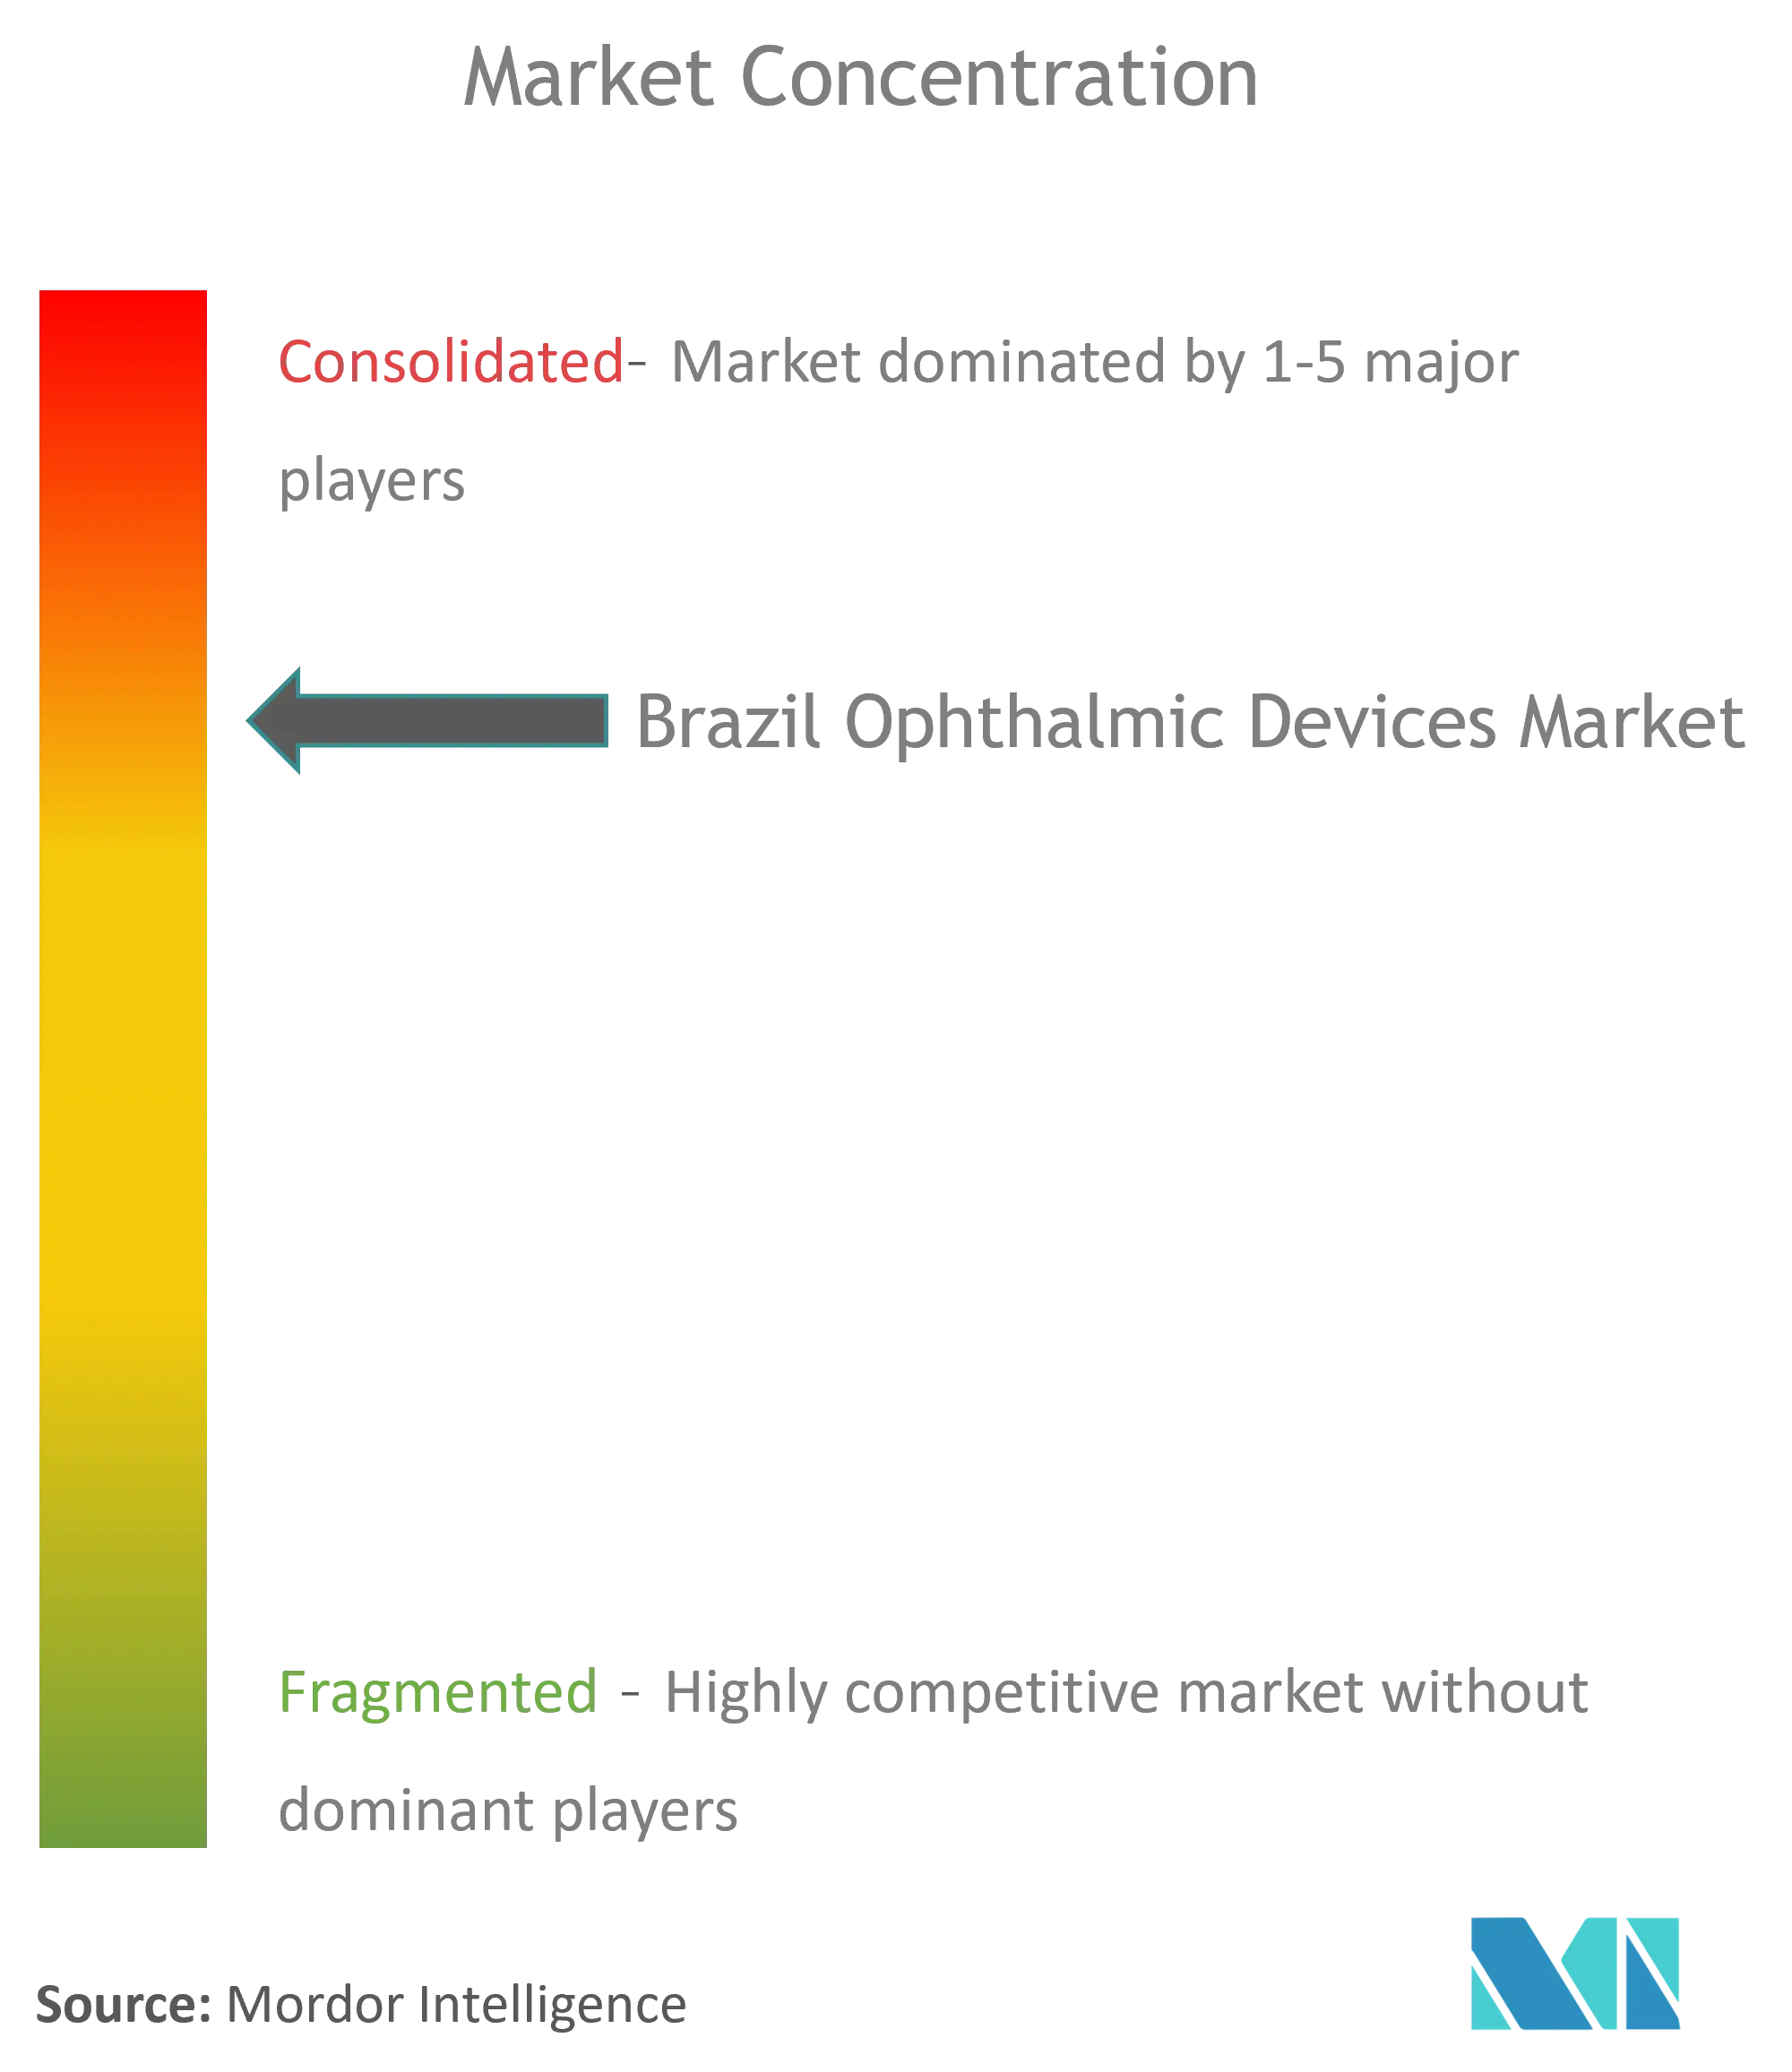 Brazil Ophthalmic Devices Market Concentration